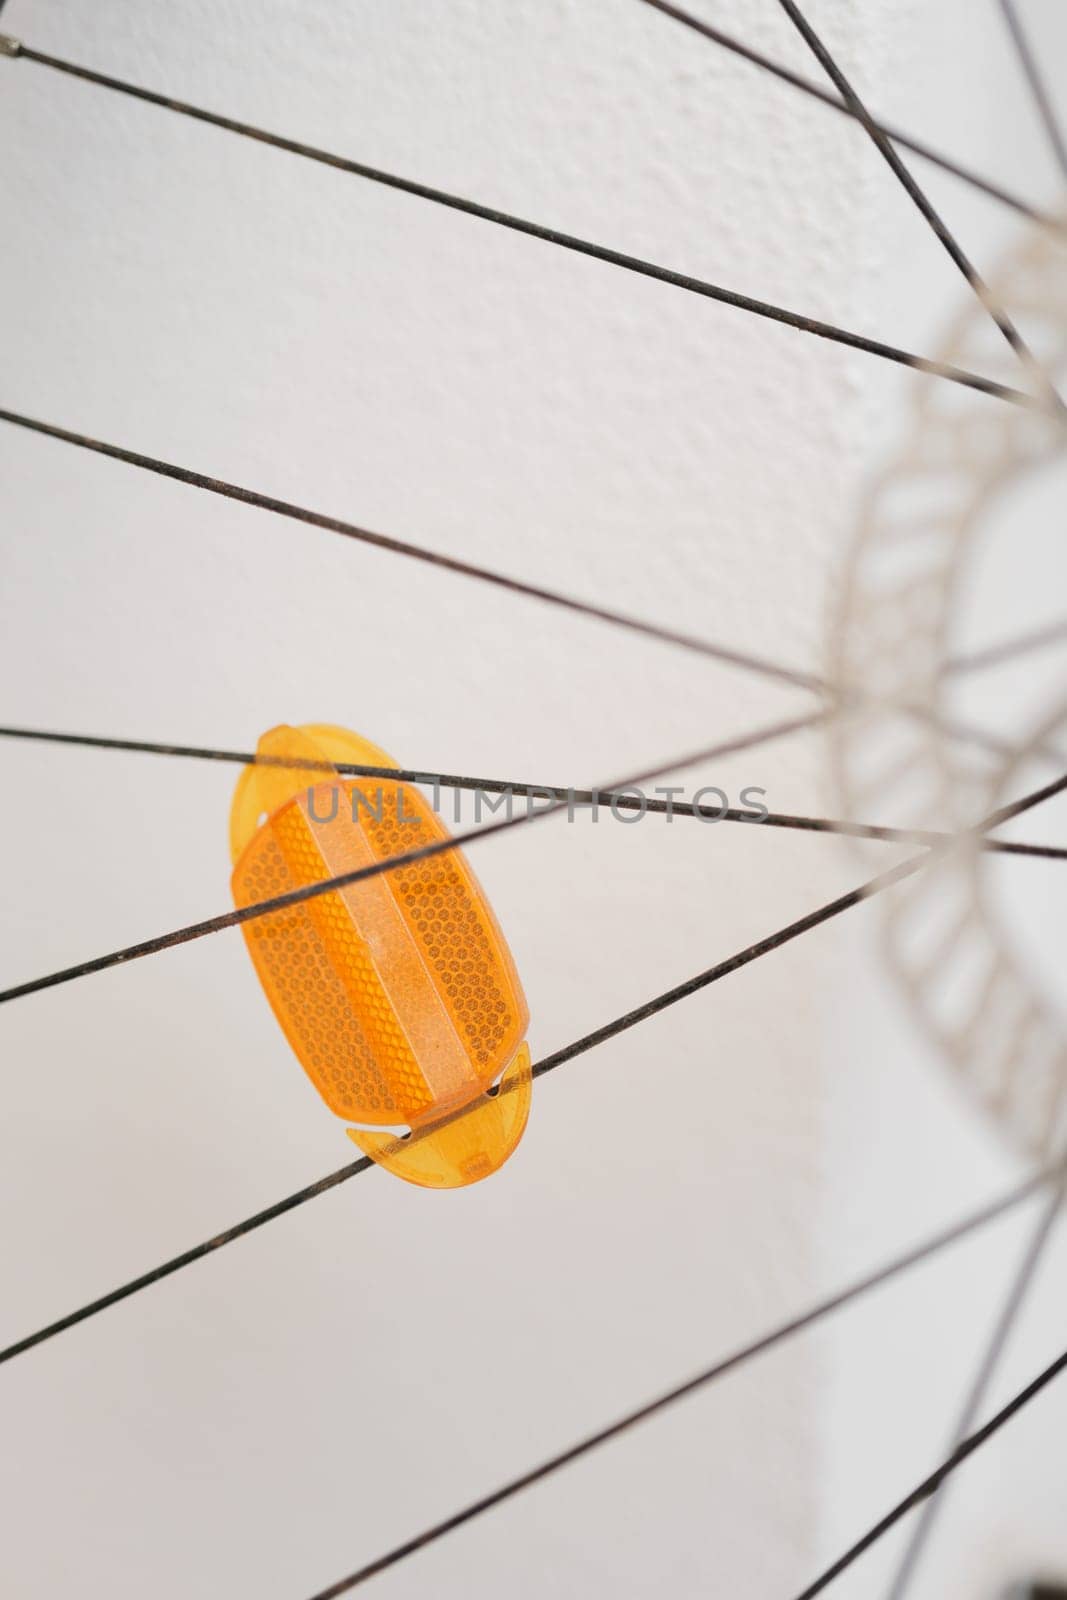 Abstract View of a Yellow Bicycle Reflector Between Spokes Against a White Wall by apavlin